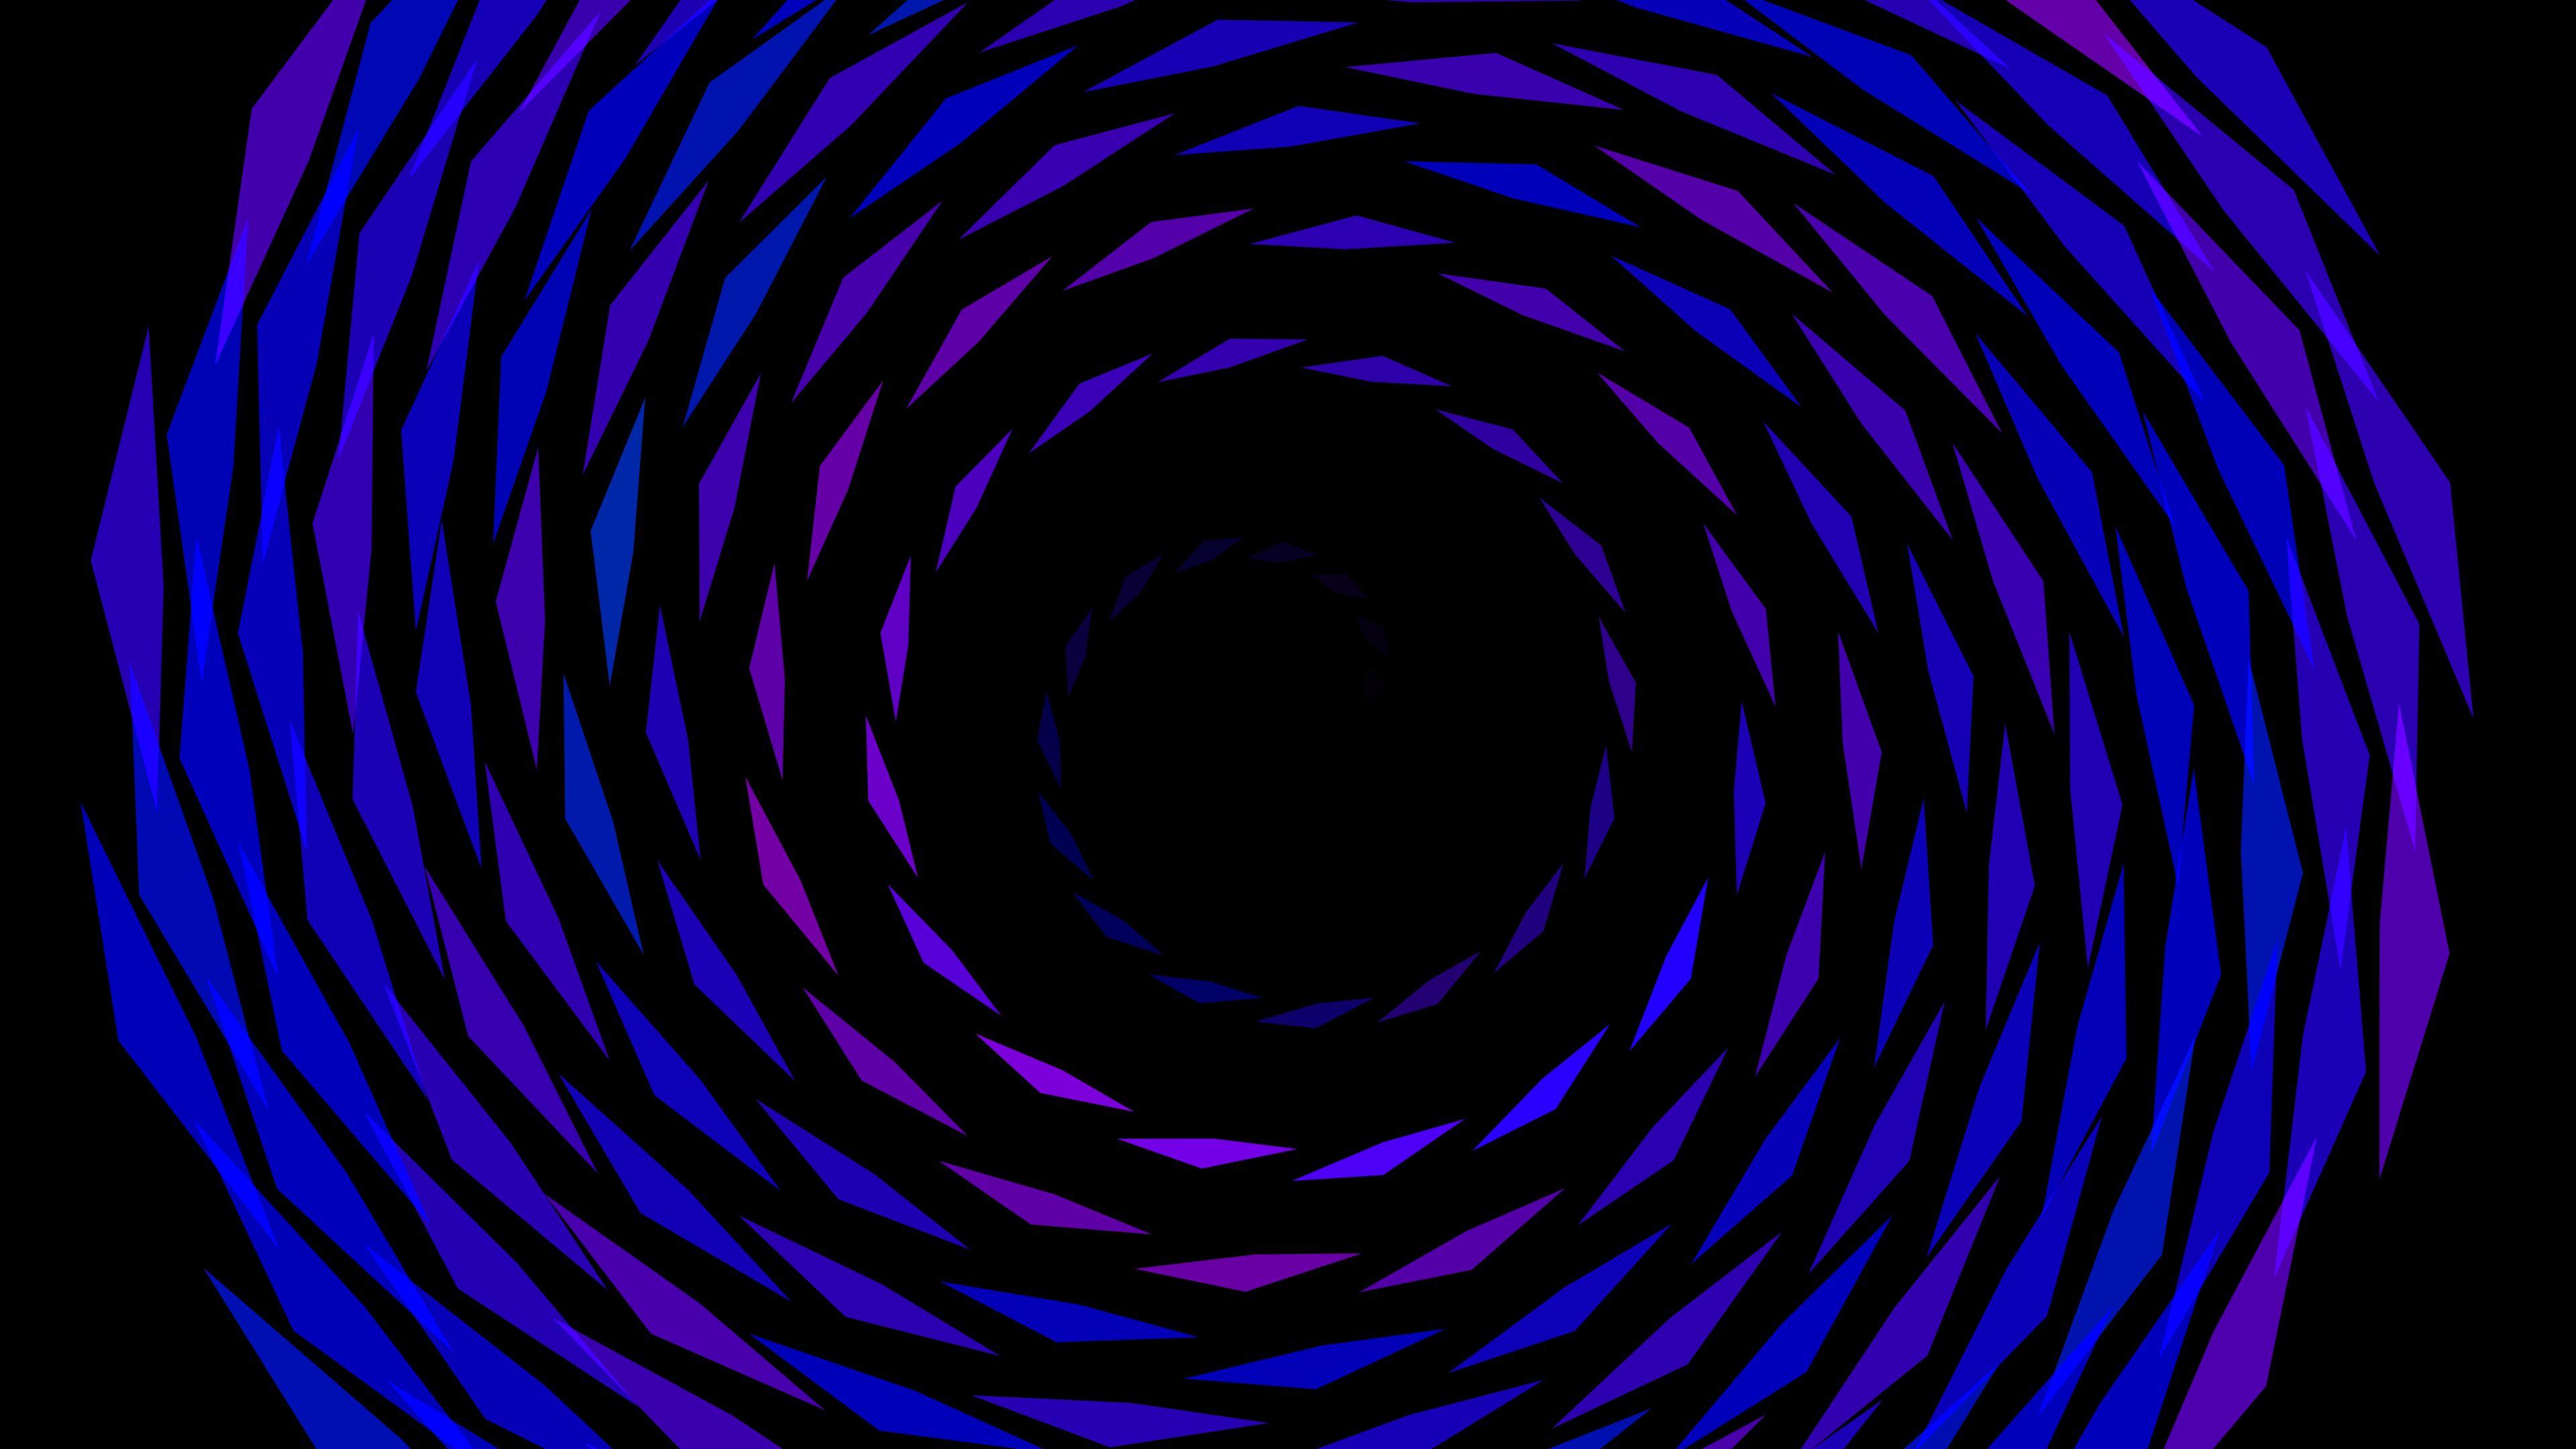 black, spiral, abstract, twisting, torsion, fragments wallpaper for mobile